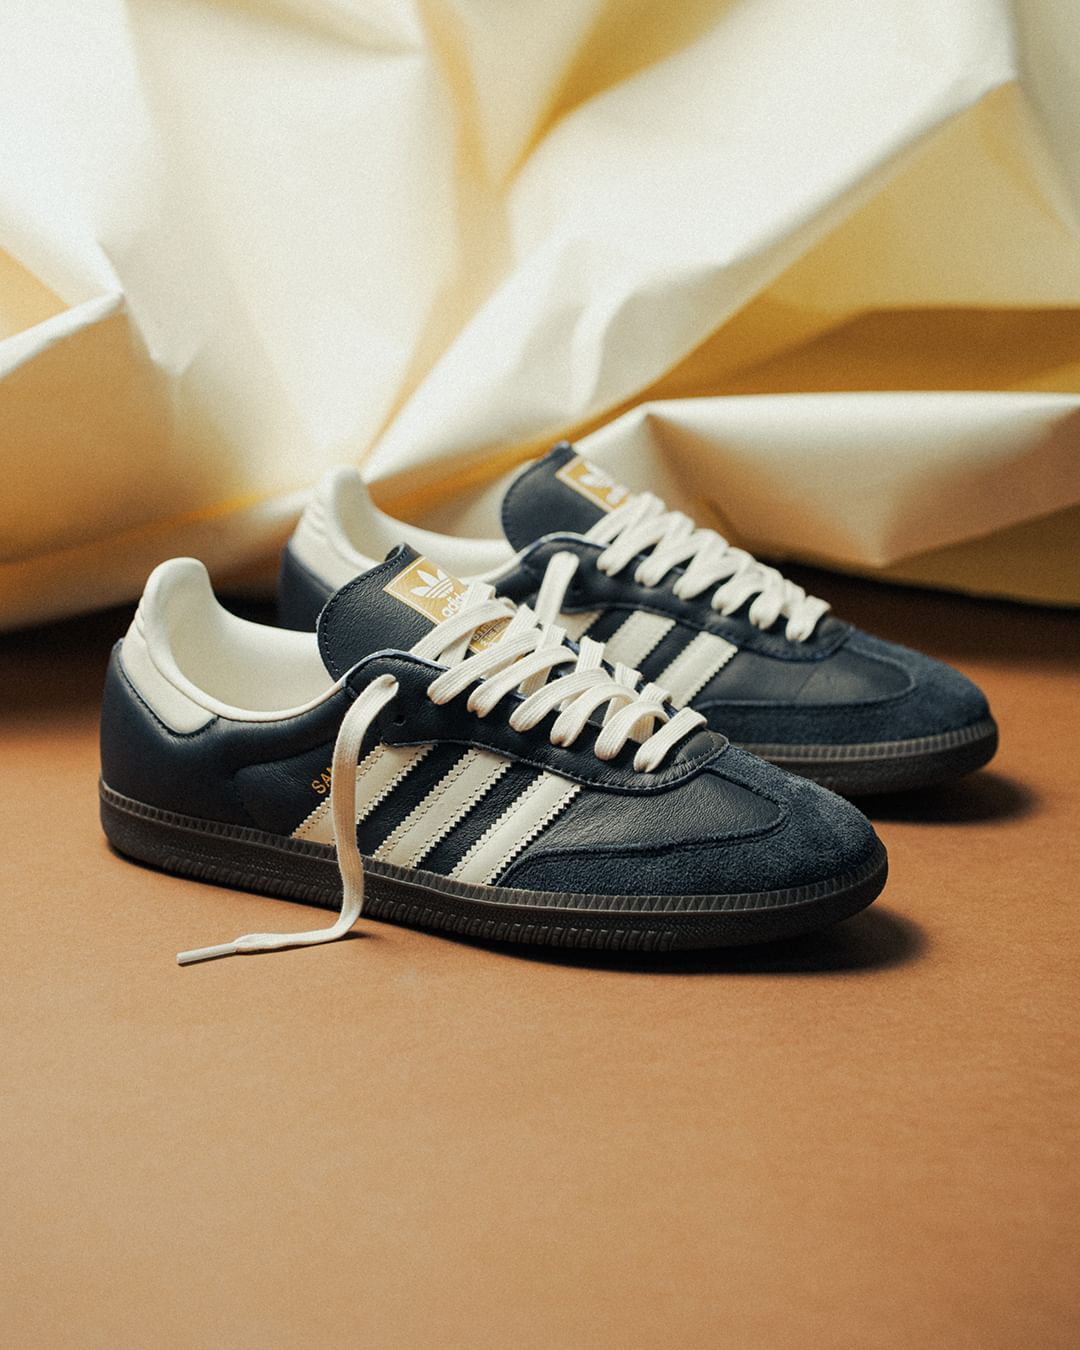 The Adidas Samba OG is Available Now in Night Navy | House of Heat°